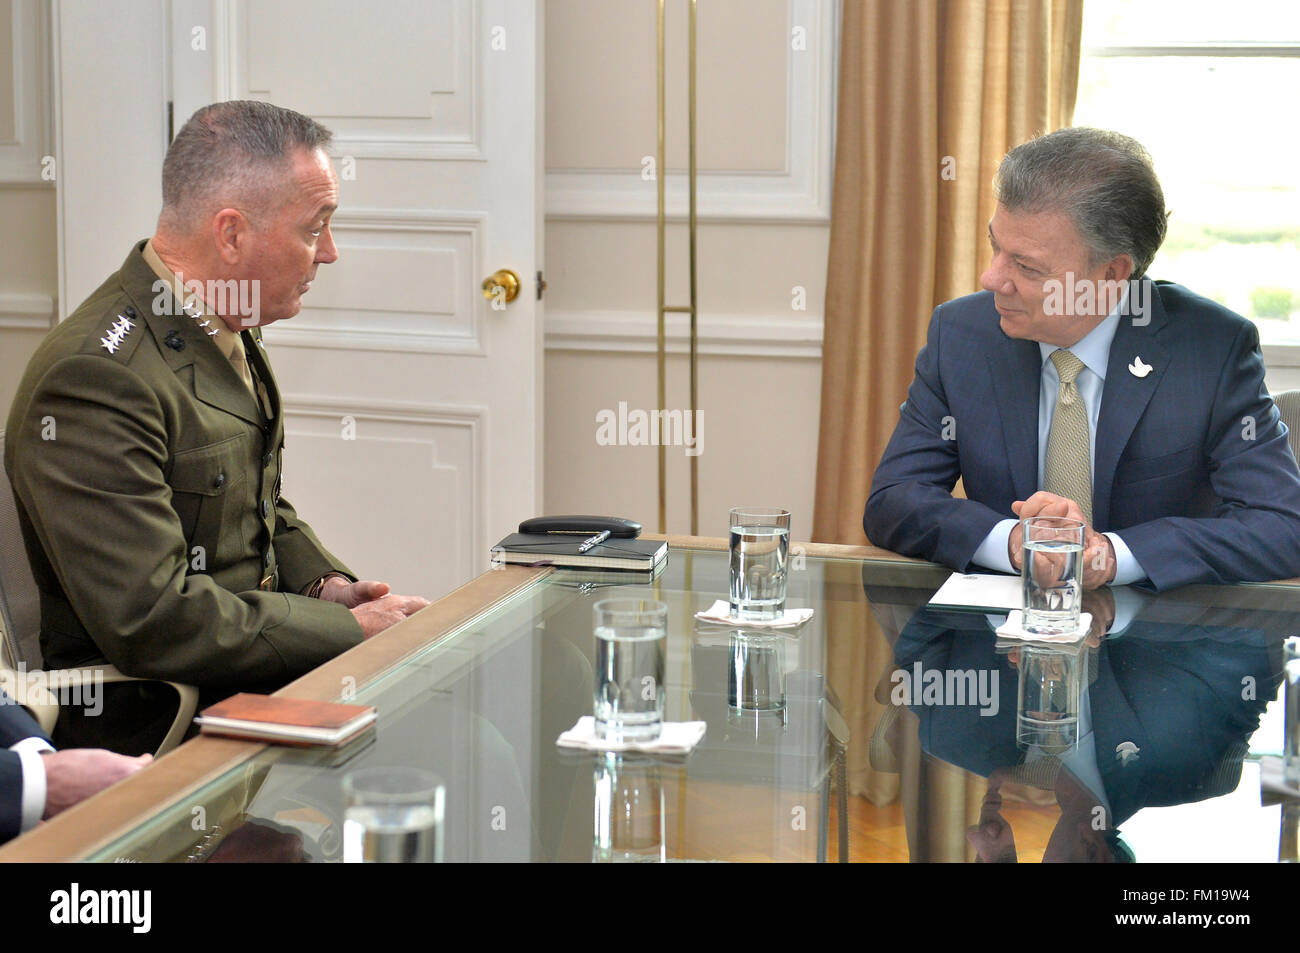 Bogota, Colombia. 10th Mar, 2016. Image provided by Colombia's Presidency shows Colombian President Juan Manuel Santos (R) talking with the United States Chairman of the Joint Chiefs of Staff General Joseph F. Dunford, in Bogota, Colombia, on March 10, 2016. © Juan David Tena/Colombia's Presidency/Xinhua/Alamy Live News Stock Photo